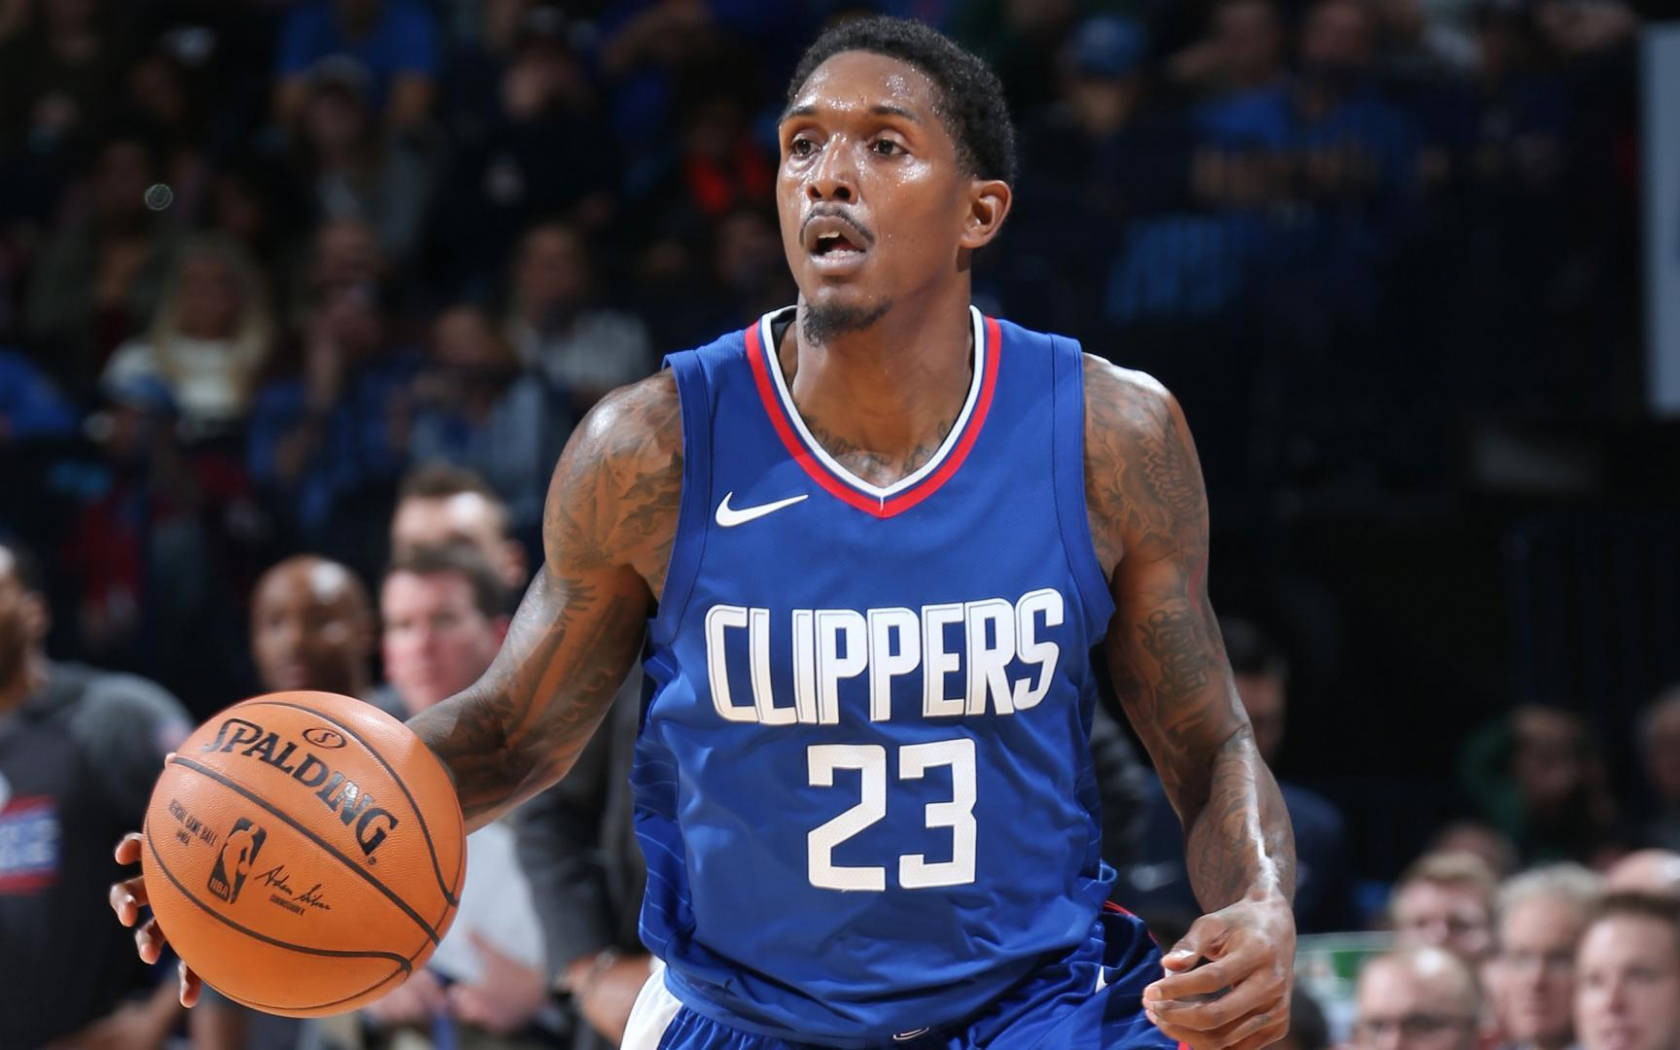 Download Lou Williams Bright Blue Clippers Jersey Wallpaper